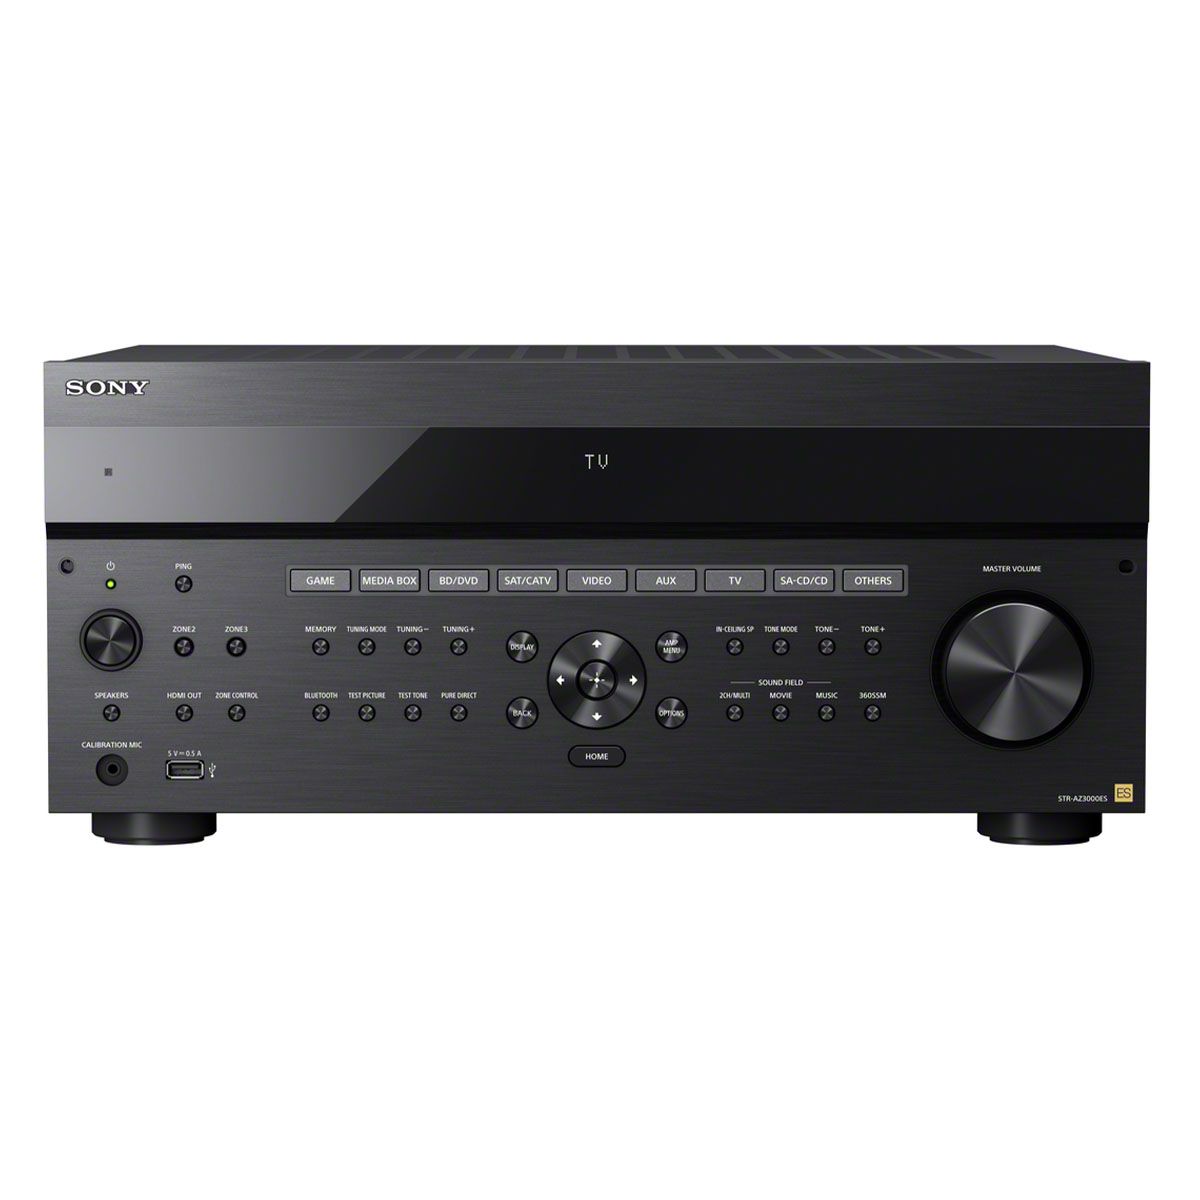 Sony STR-AZ3000ES Home Theater Receiver - front view without cover